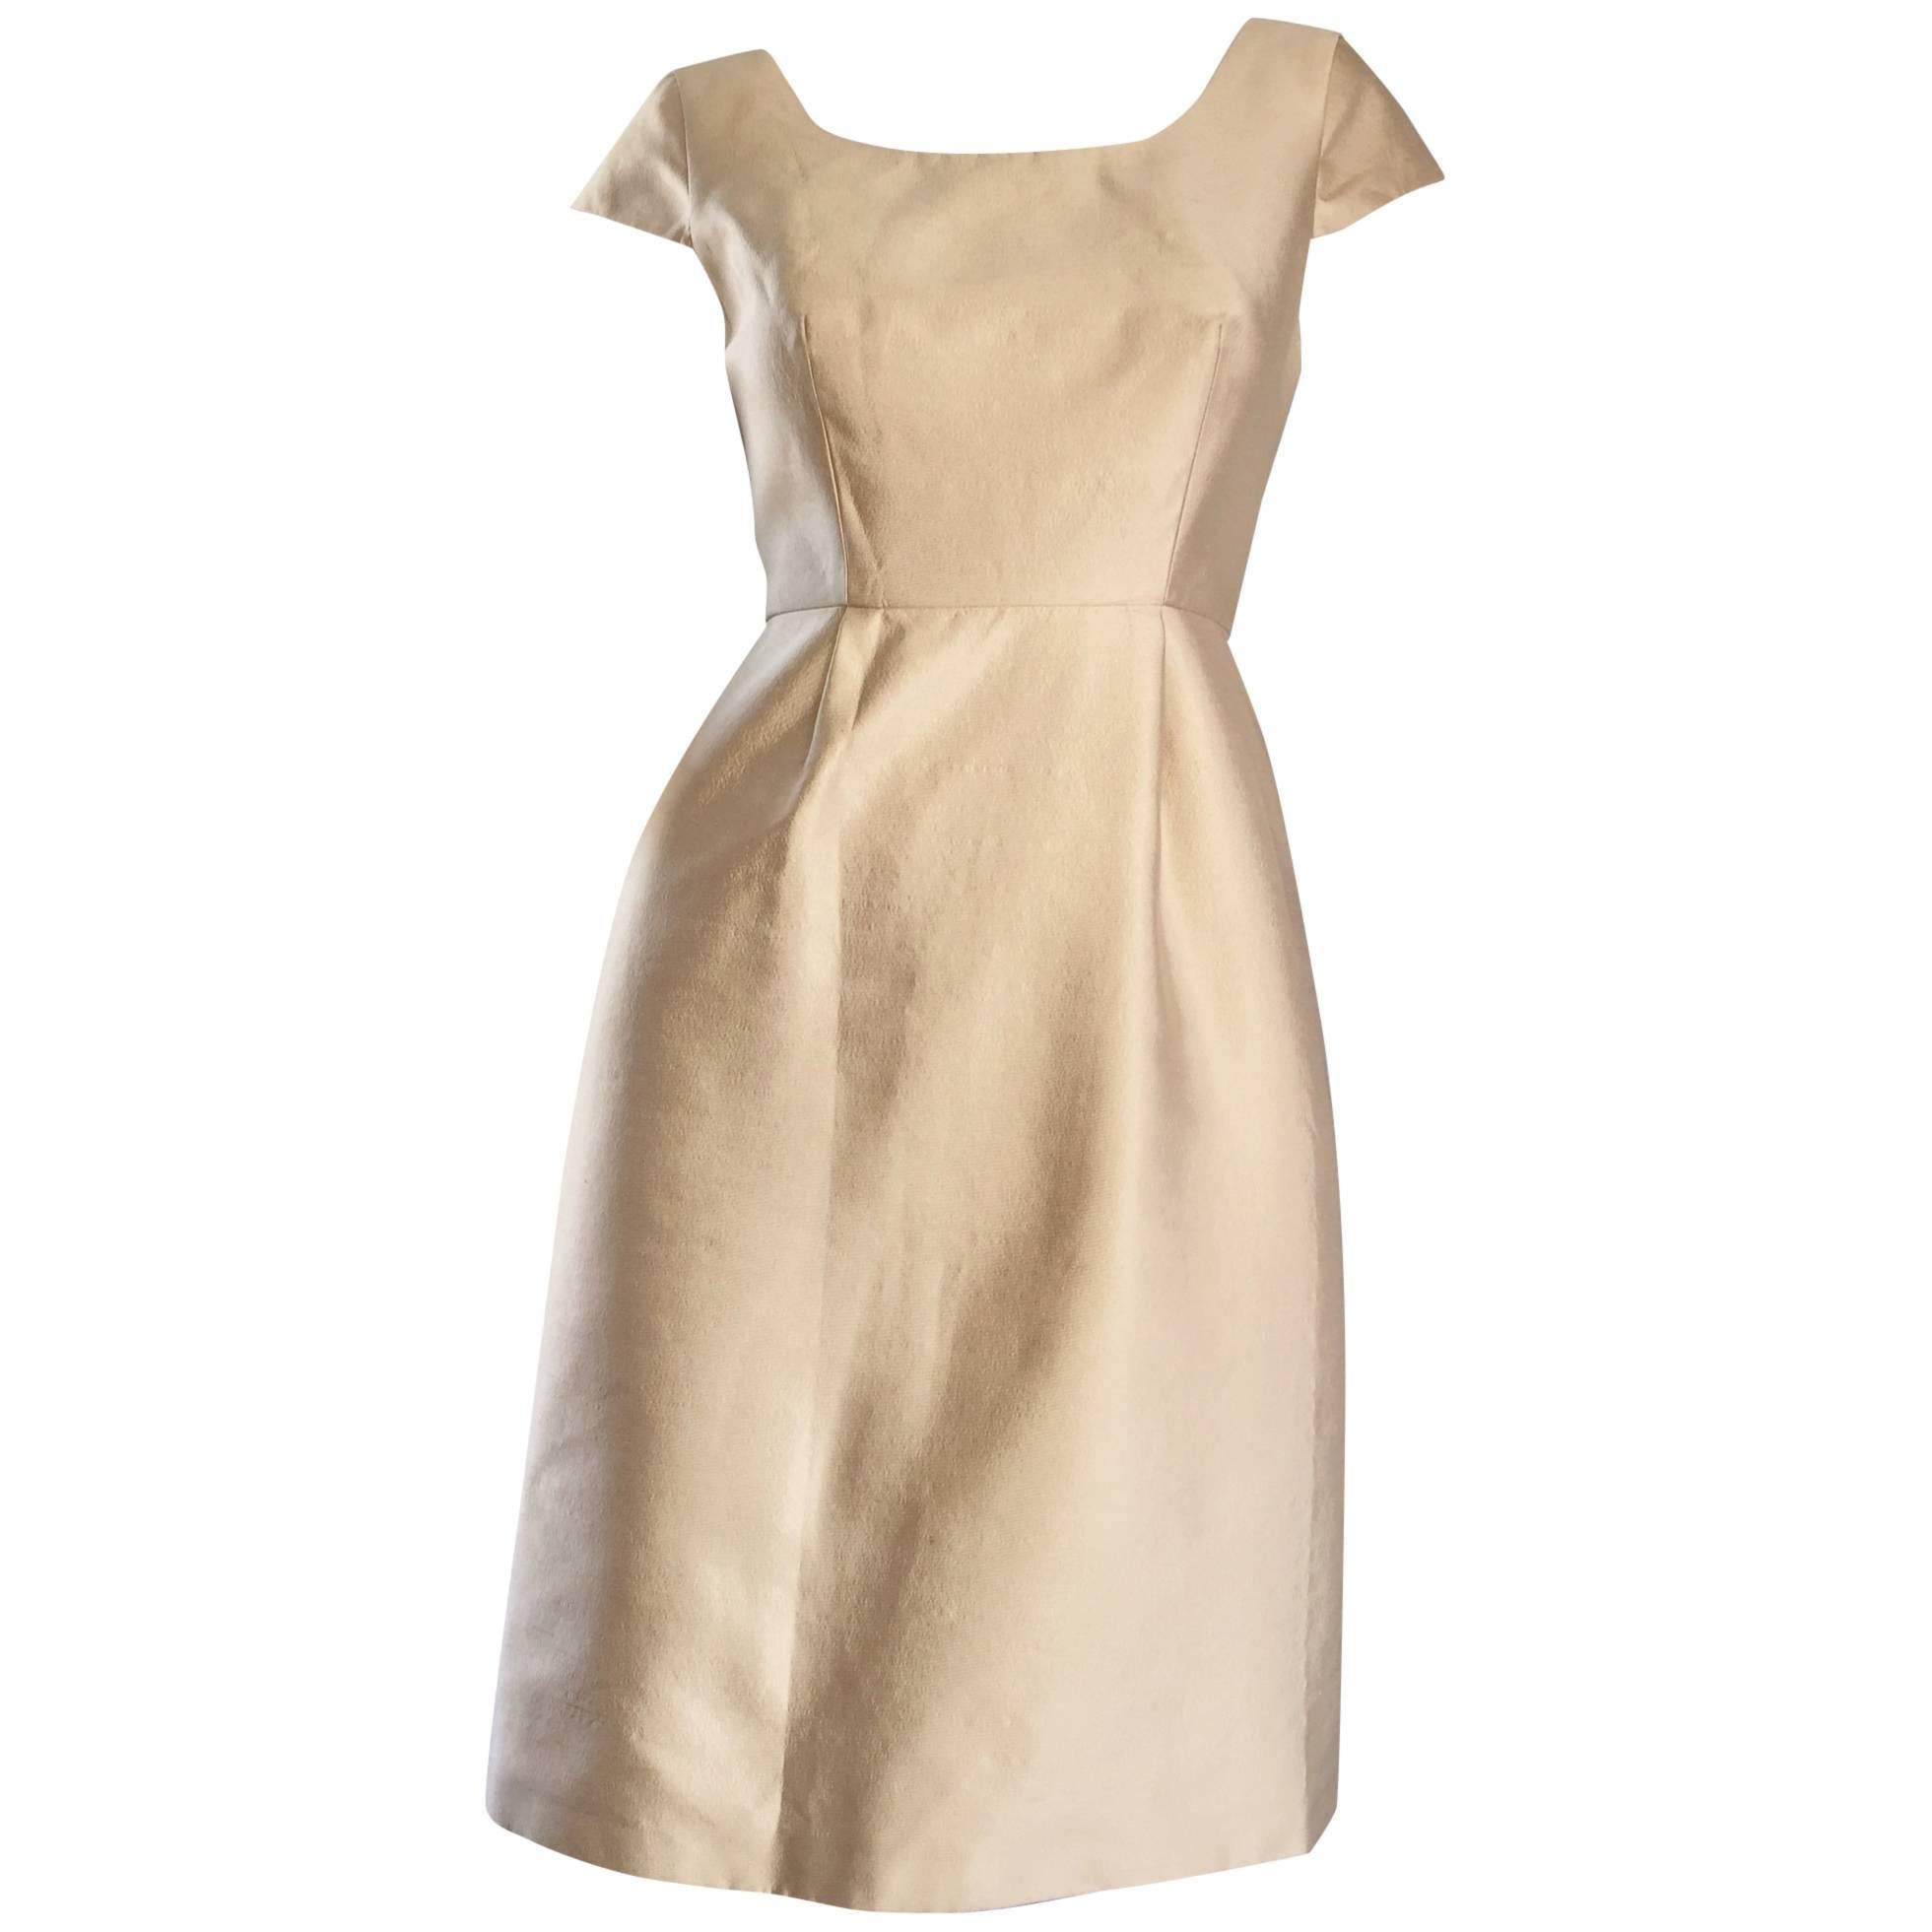 Badgley Mischka Light Gold Fit and Flare 50s Style Flattering Silk Dress